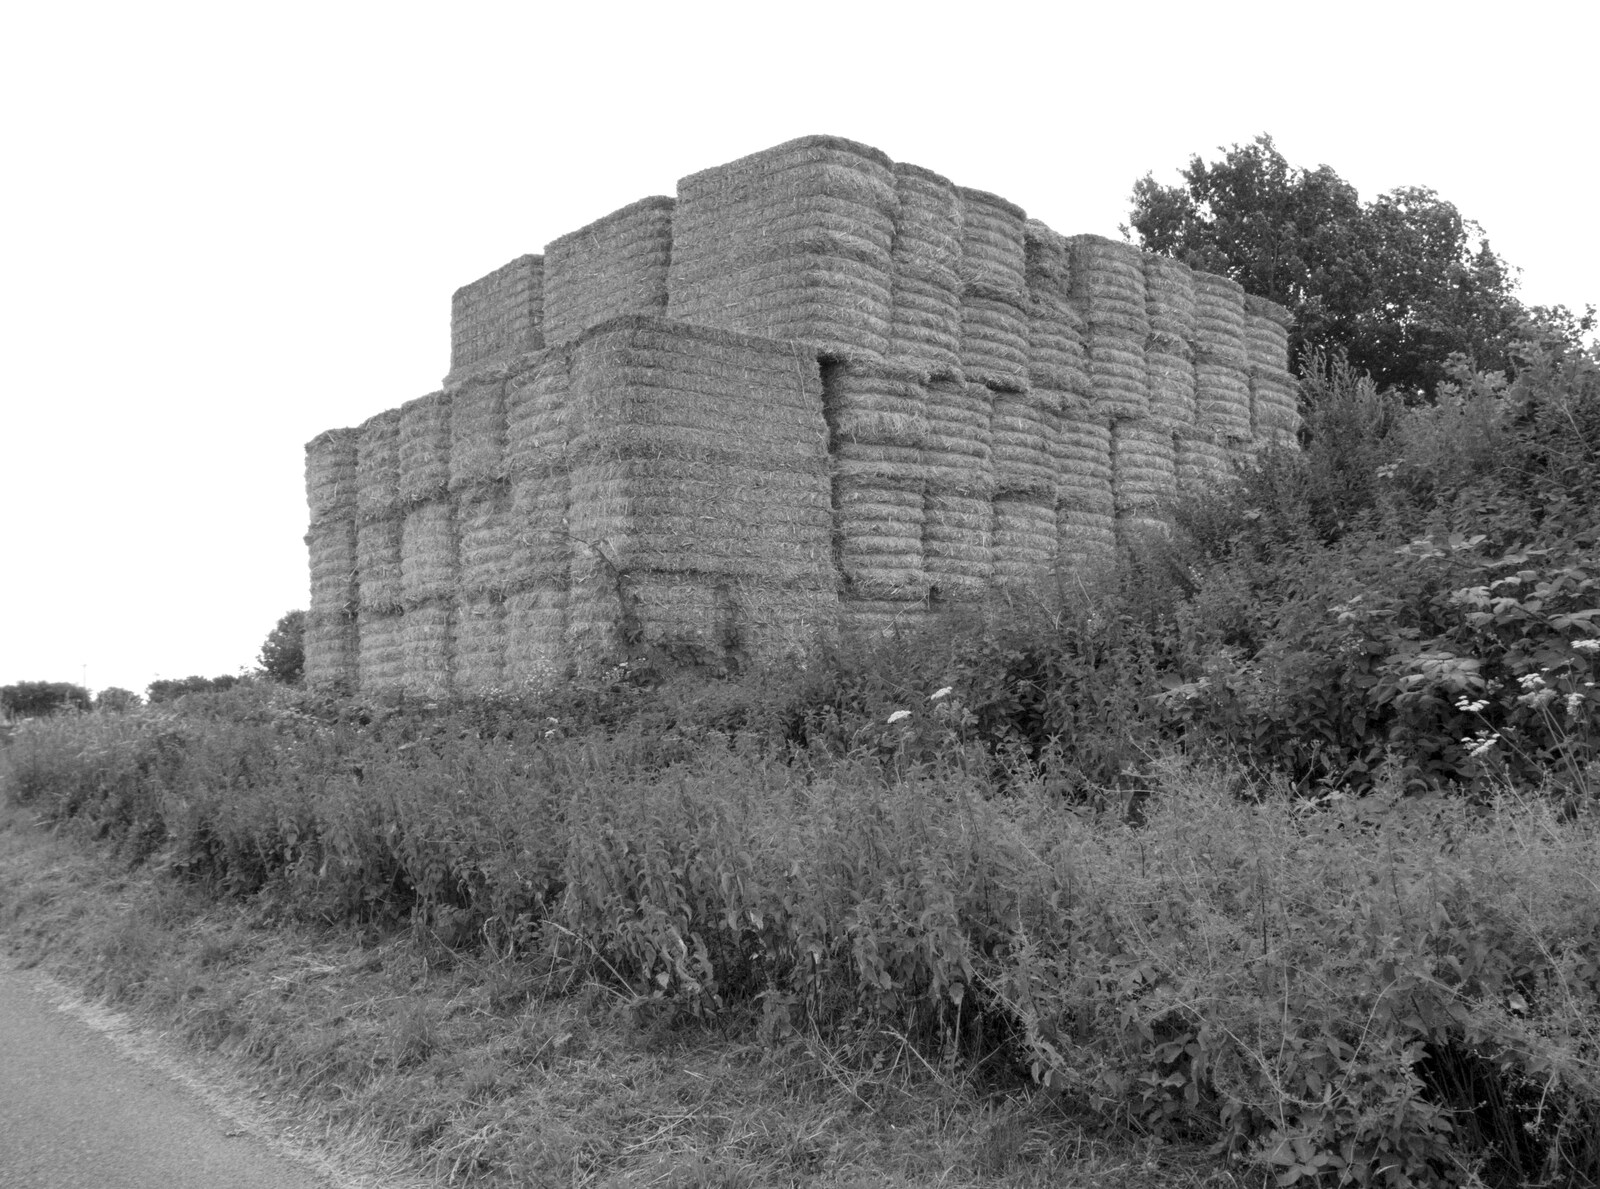 There's a Bauhaus look on some straw bales from Lockdown Bike Rides and an Anniversary Picnic, Mellis and Brome, Suffolk - 3rd July 2020